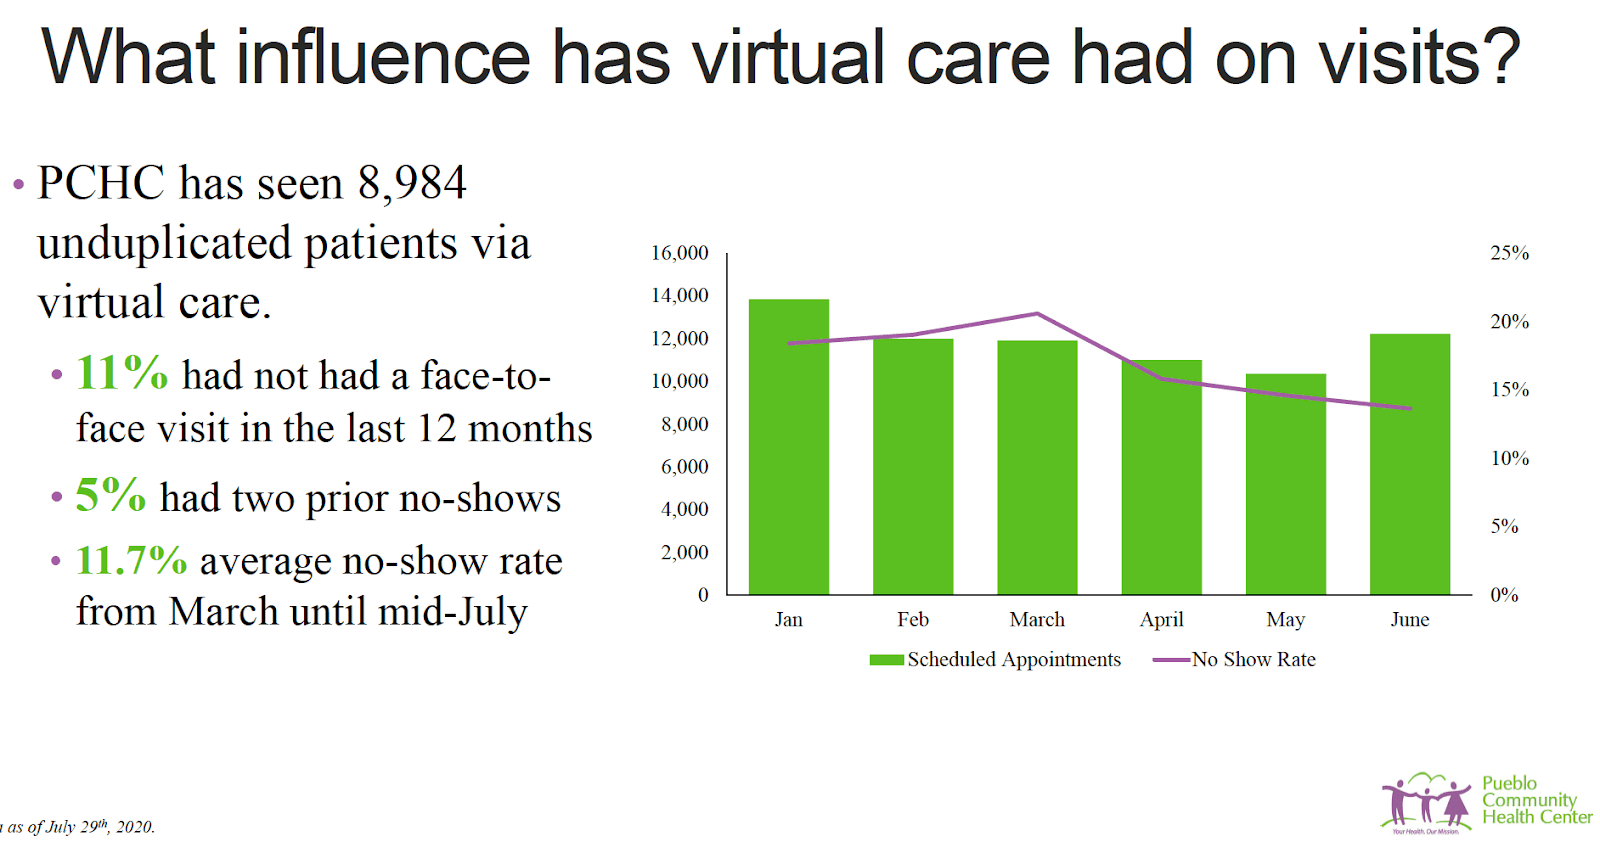 What influence has virtual care had on visits?